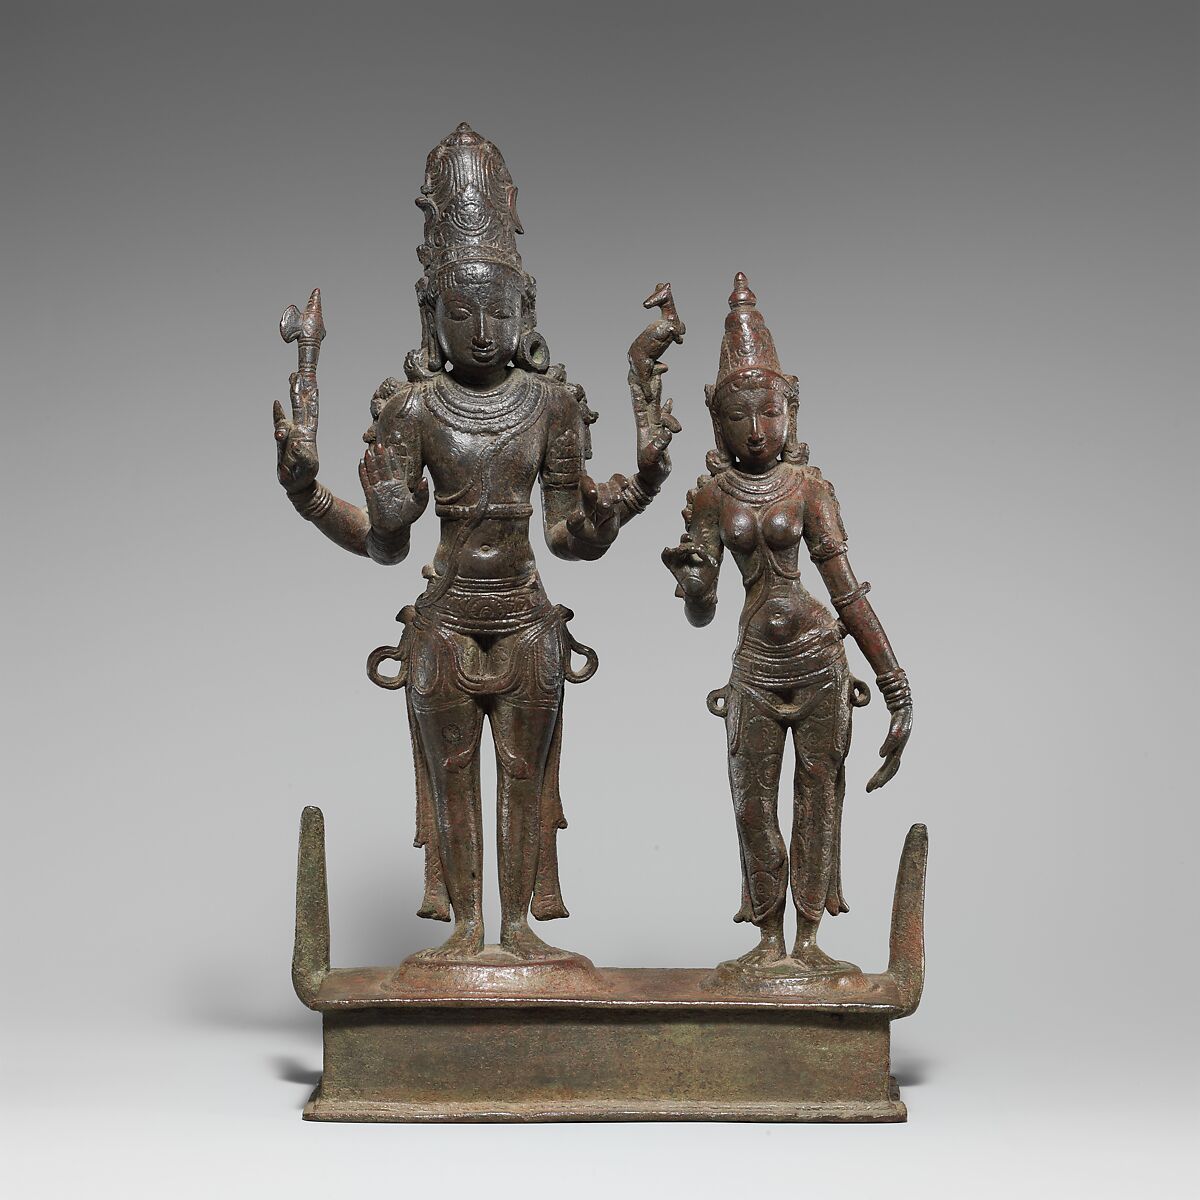 Standing Shiva and Parvati, Copper alloy, India 